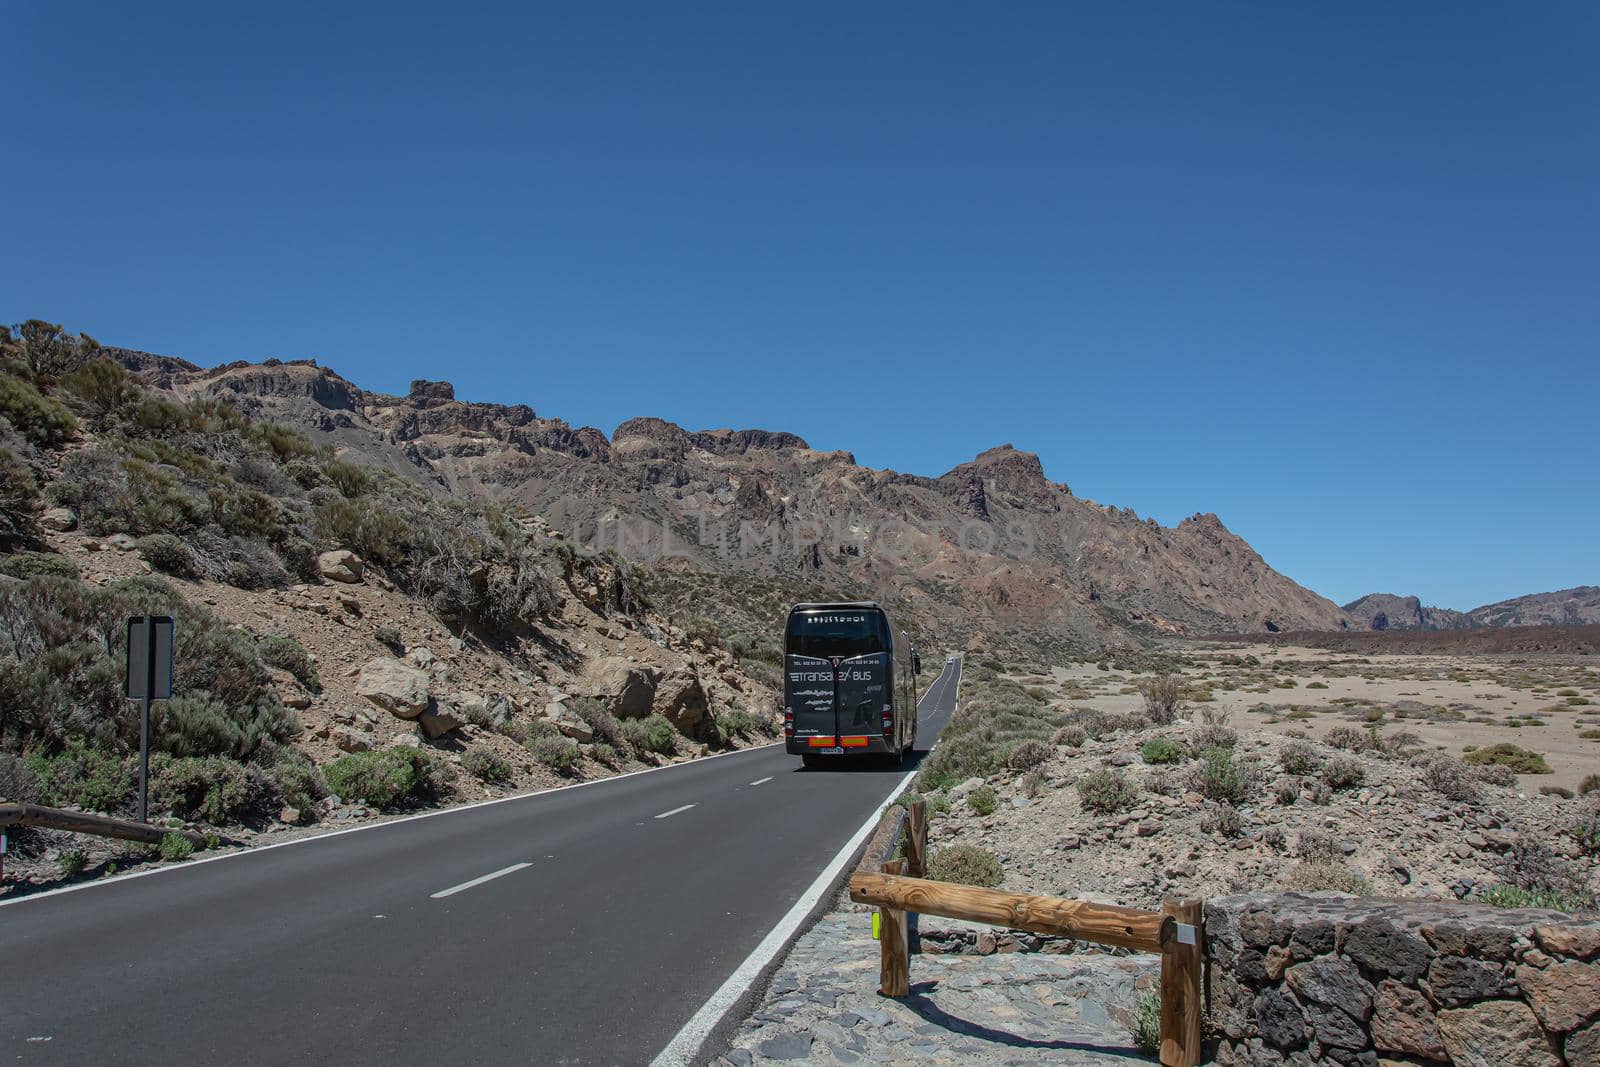 Tenerife island, Spain - 05/10/2018: Tourist bus rides on a mountain road by Grommik